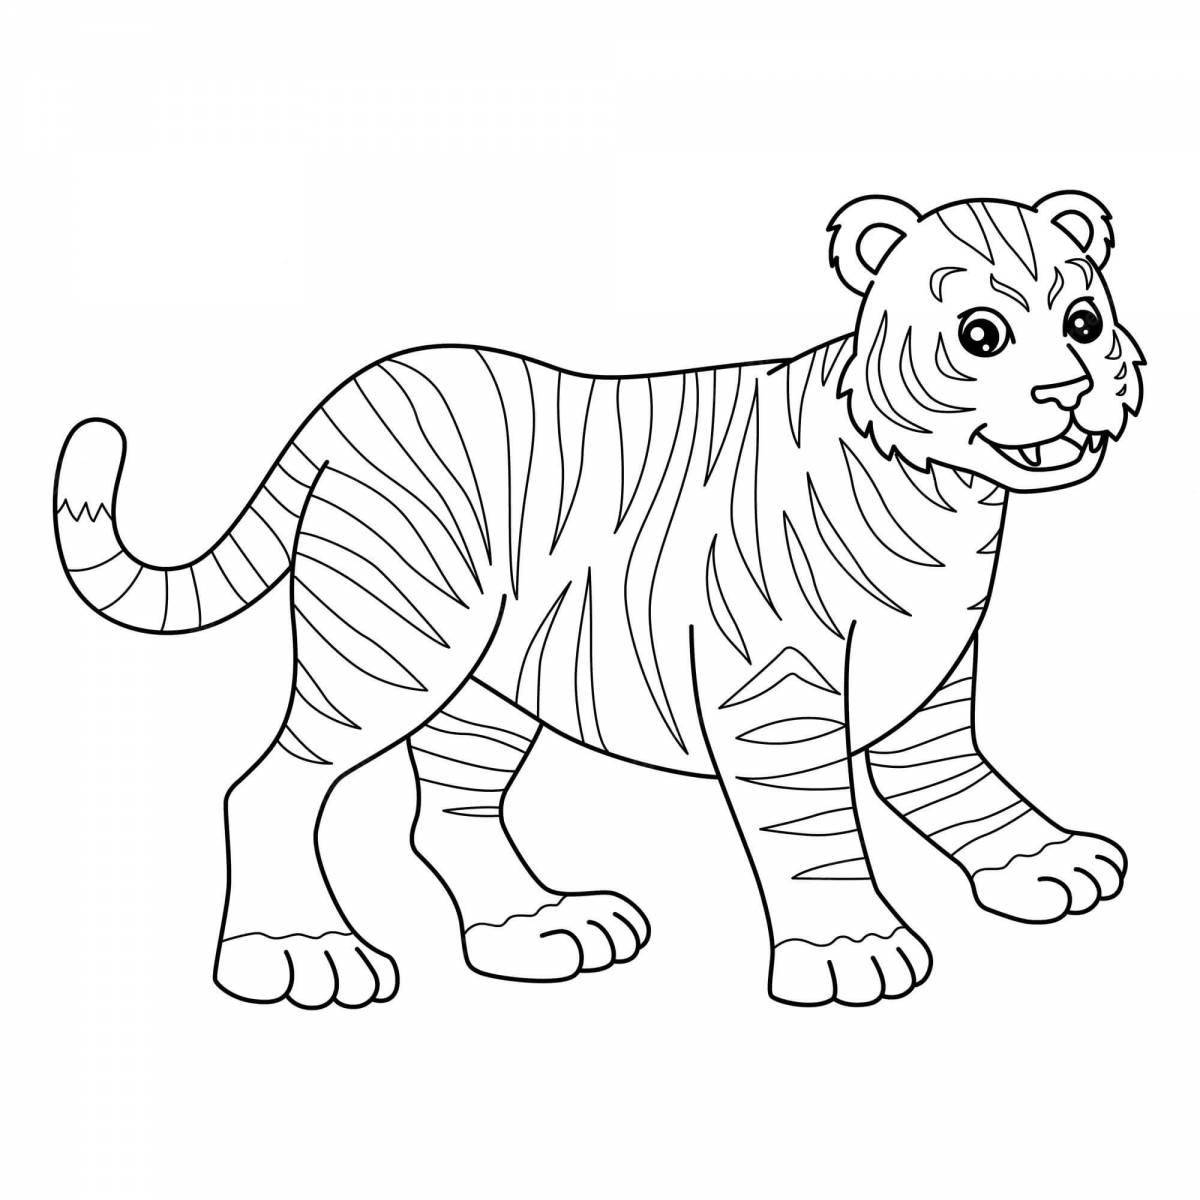 Bright tiger without stripes for children